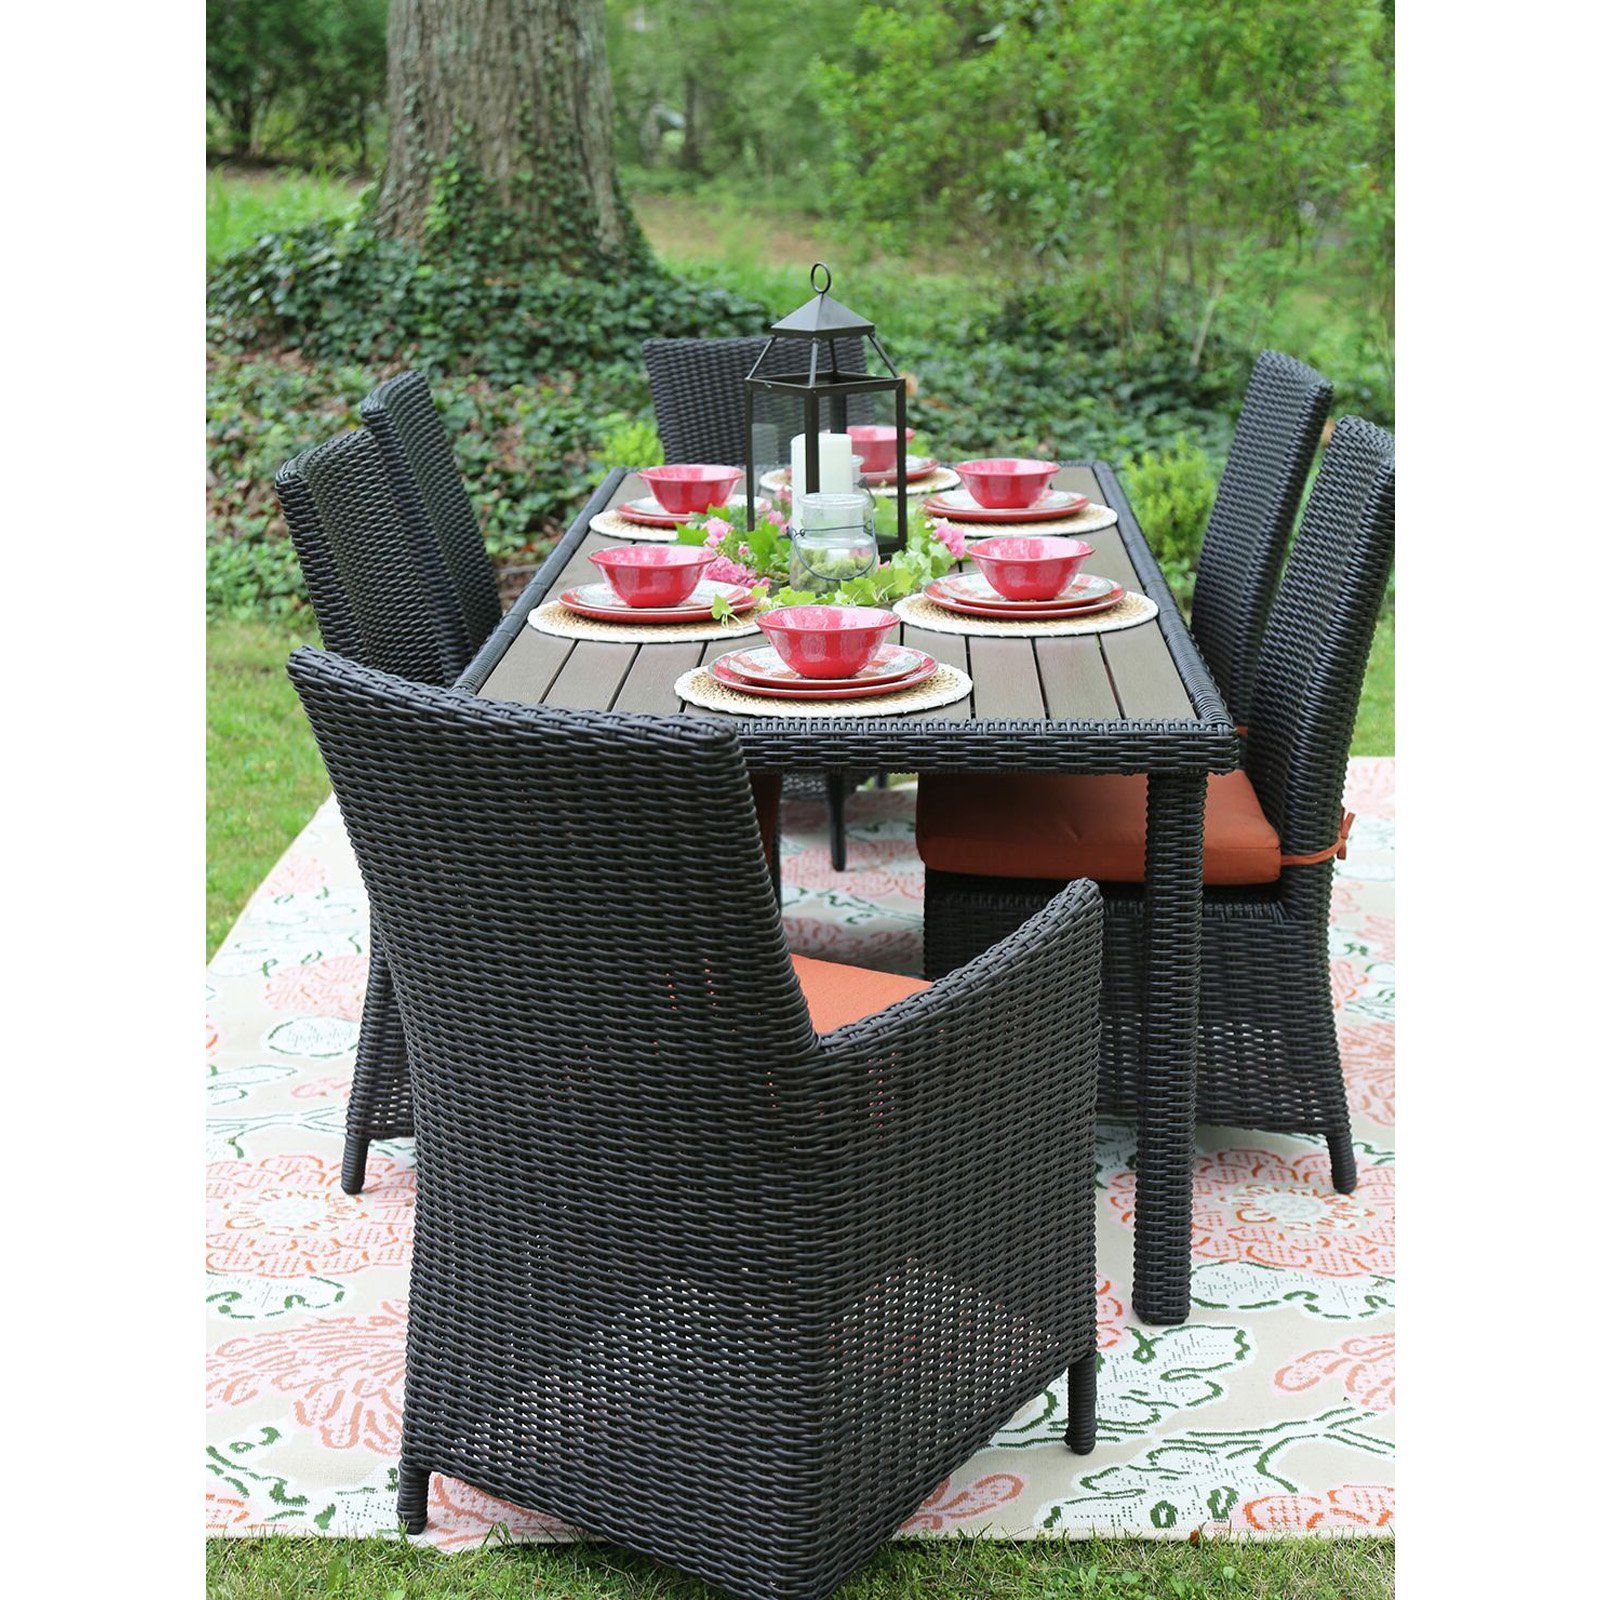 Ae Outdoor Denali 7 Piece All Weather Wicker Rectangular Patio Dining For Well Liked Large Rectangular Patio Dining Sets (View 7 of 15)